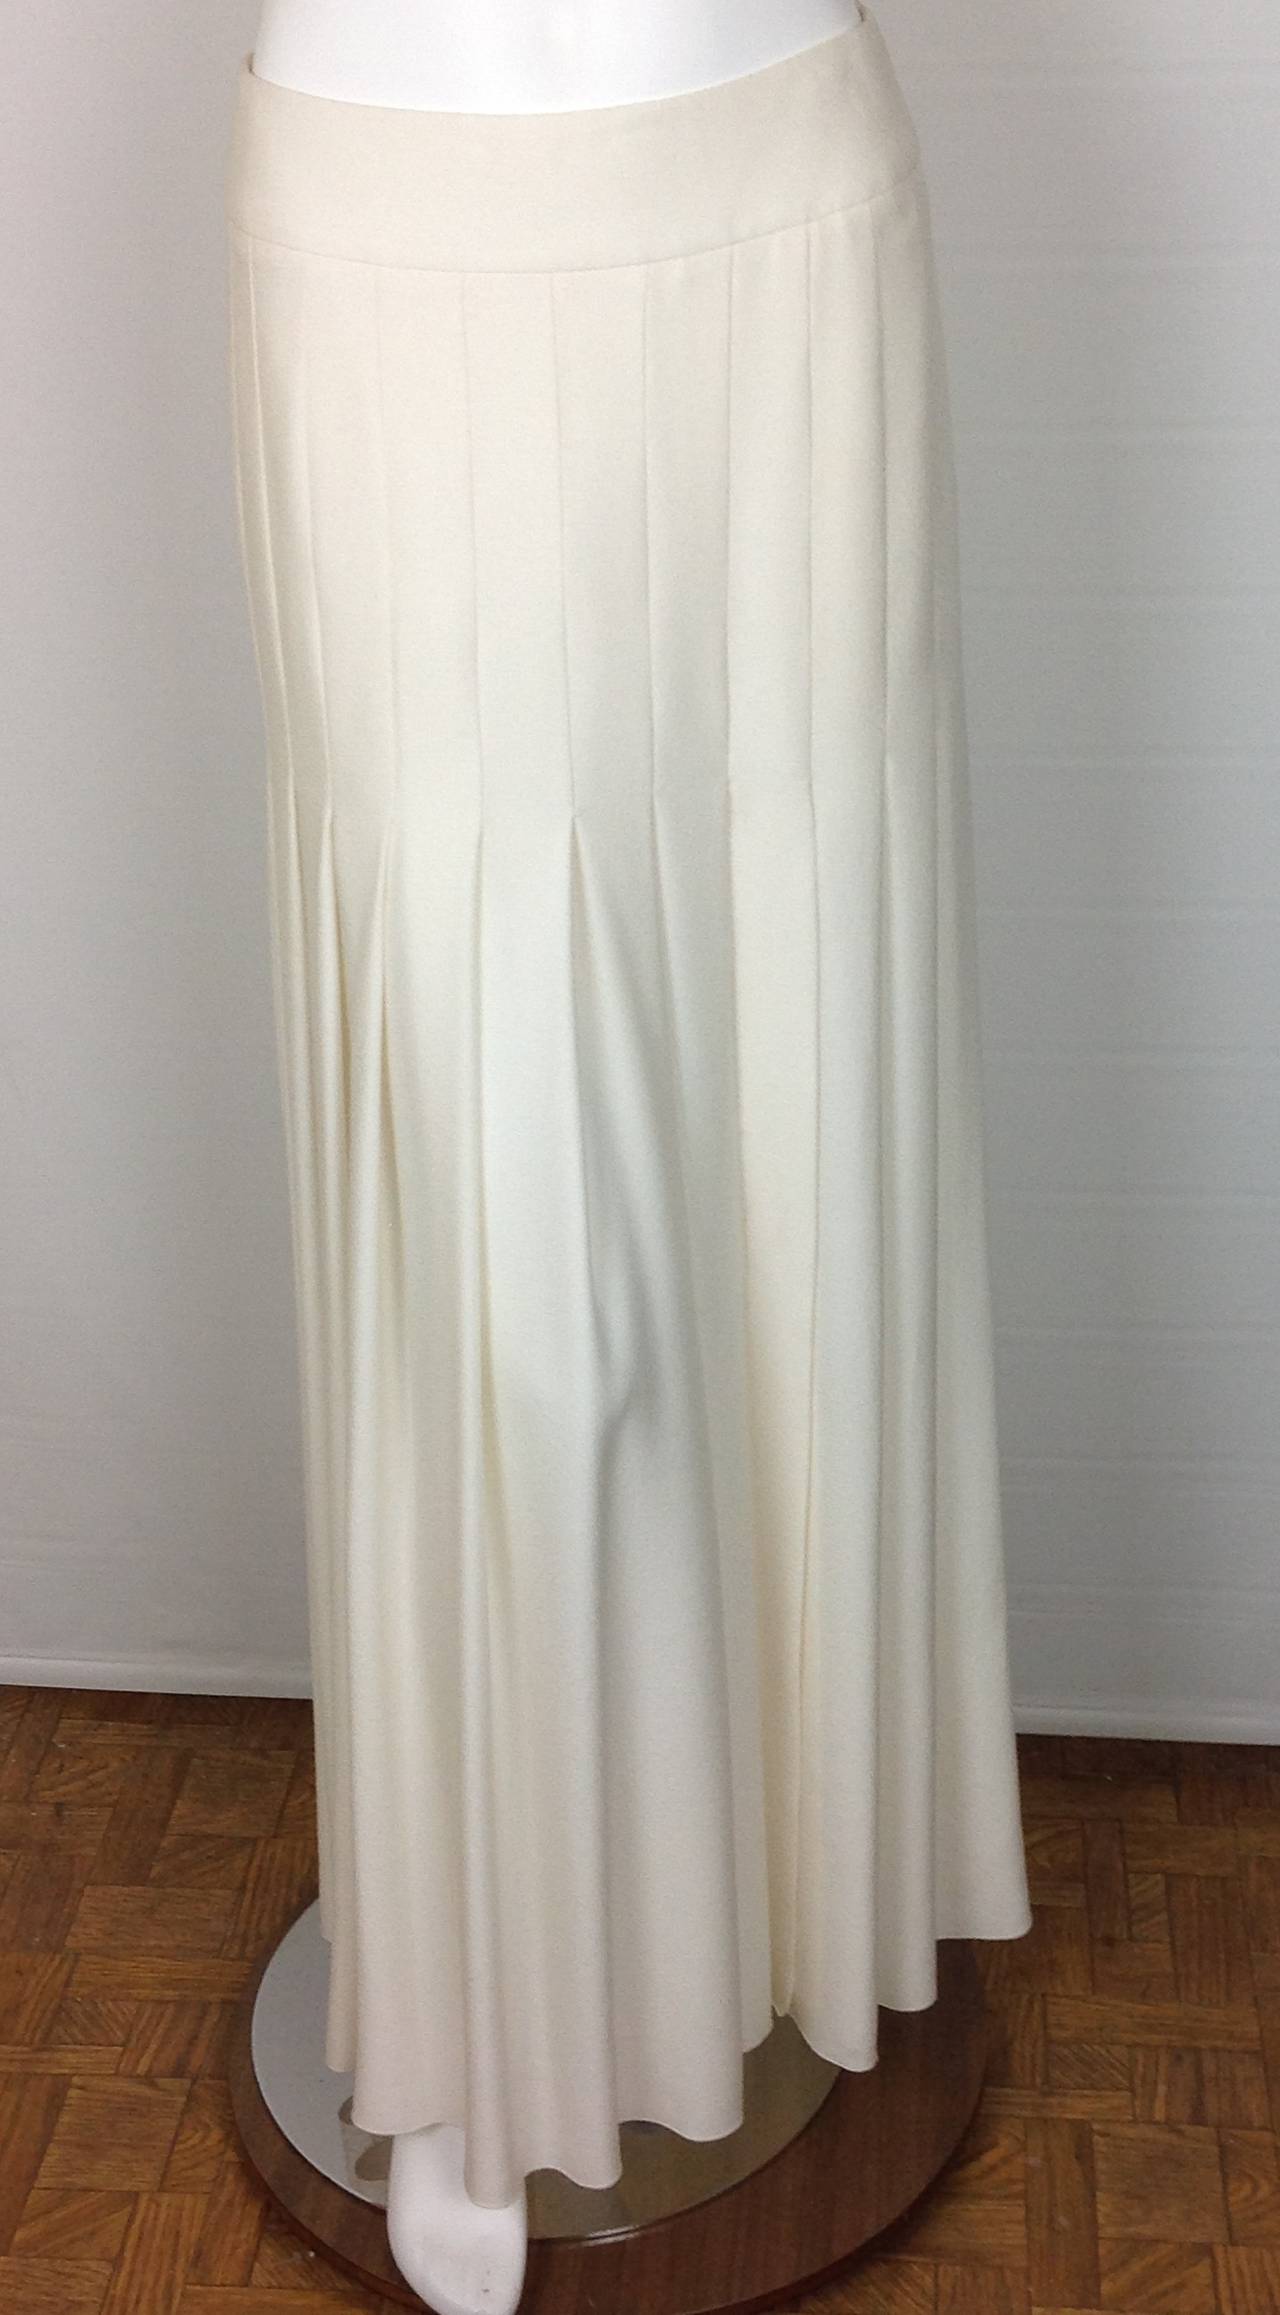 Long white silk Chanel skirt. Summer 2014 collection.
Fitted close to the hip, the pleats start 12